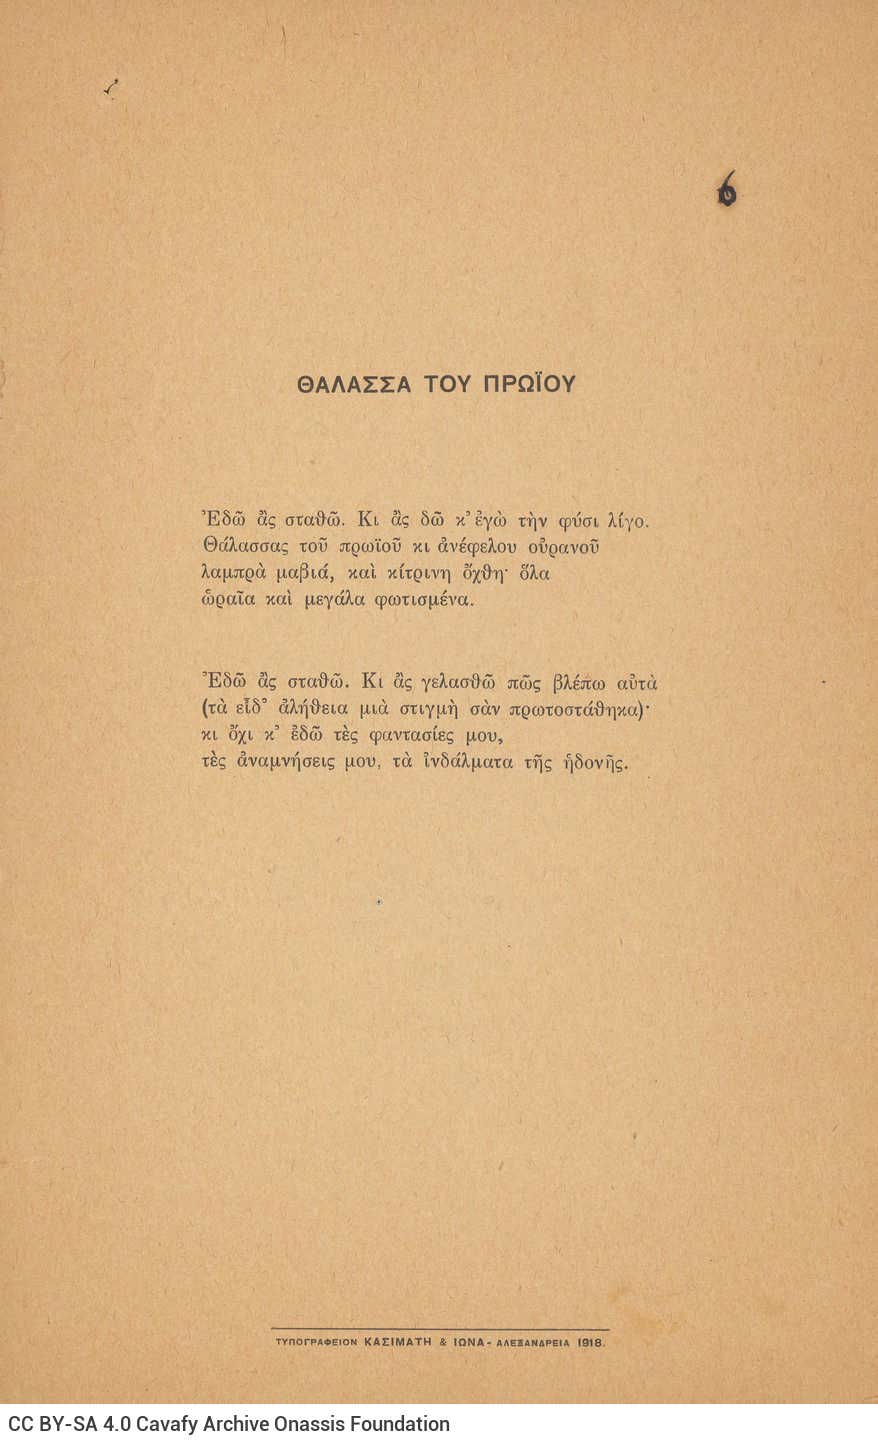 Collection of poems by Cavafy, comprising 44 loose printed broadsheets, with 40 poems on the recto. The verso of all sheets i